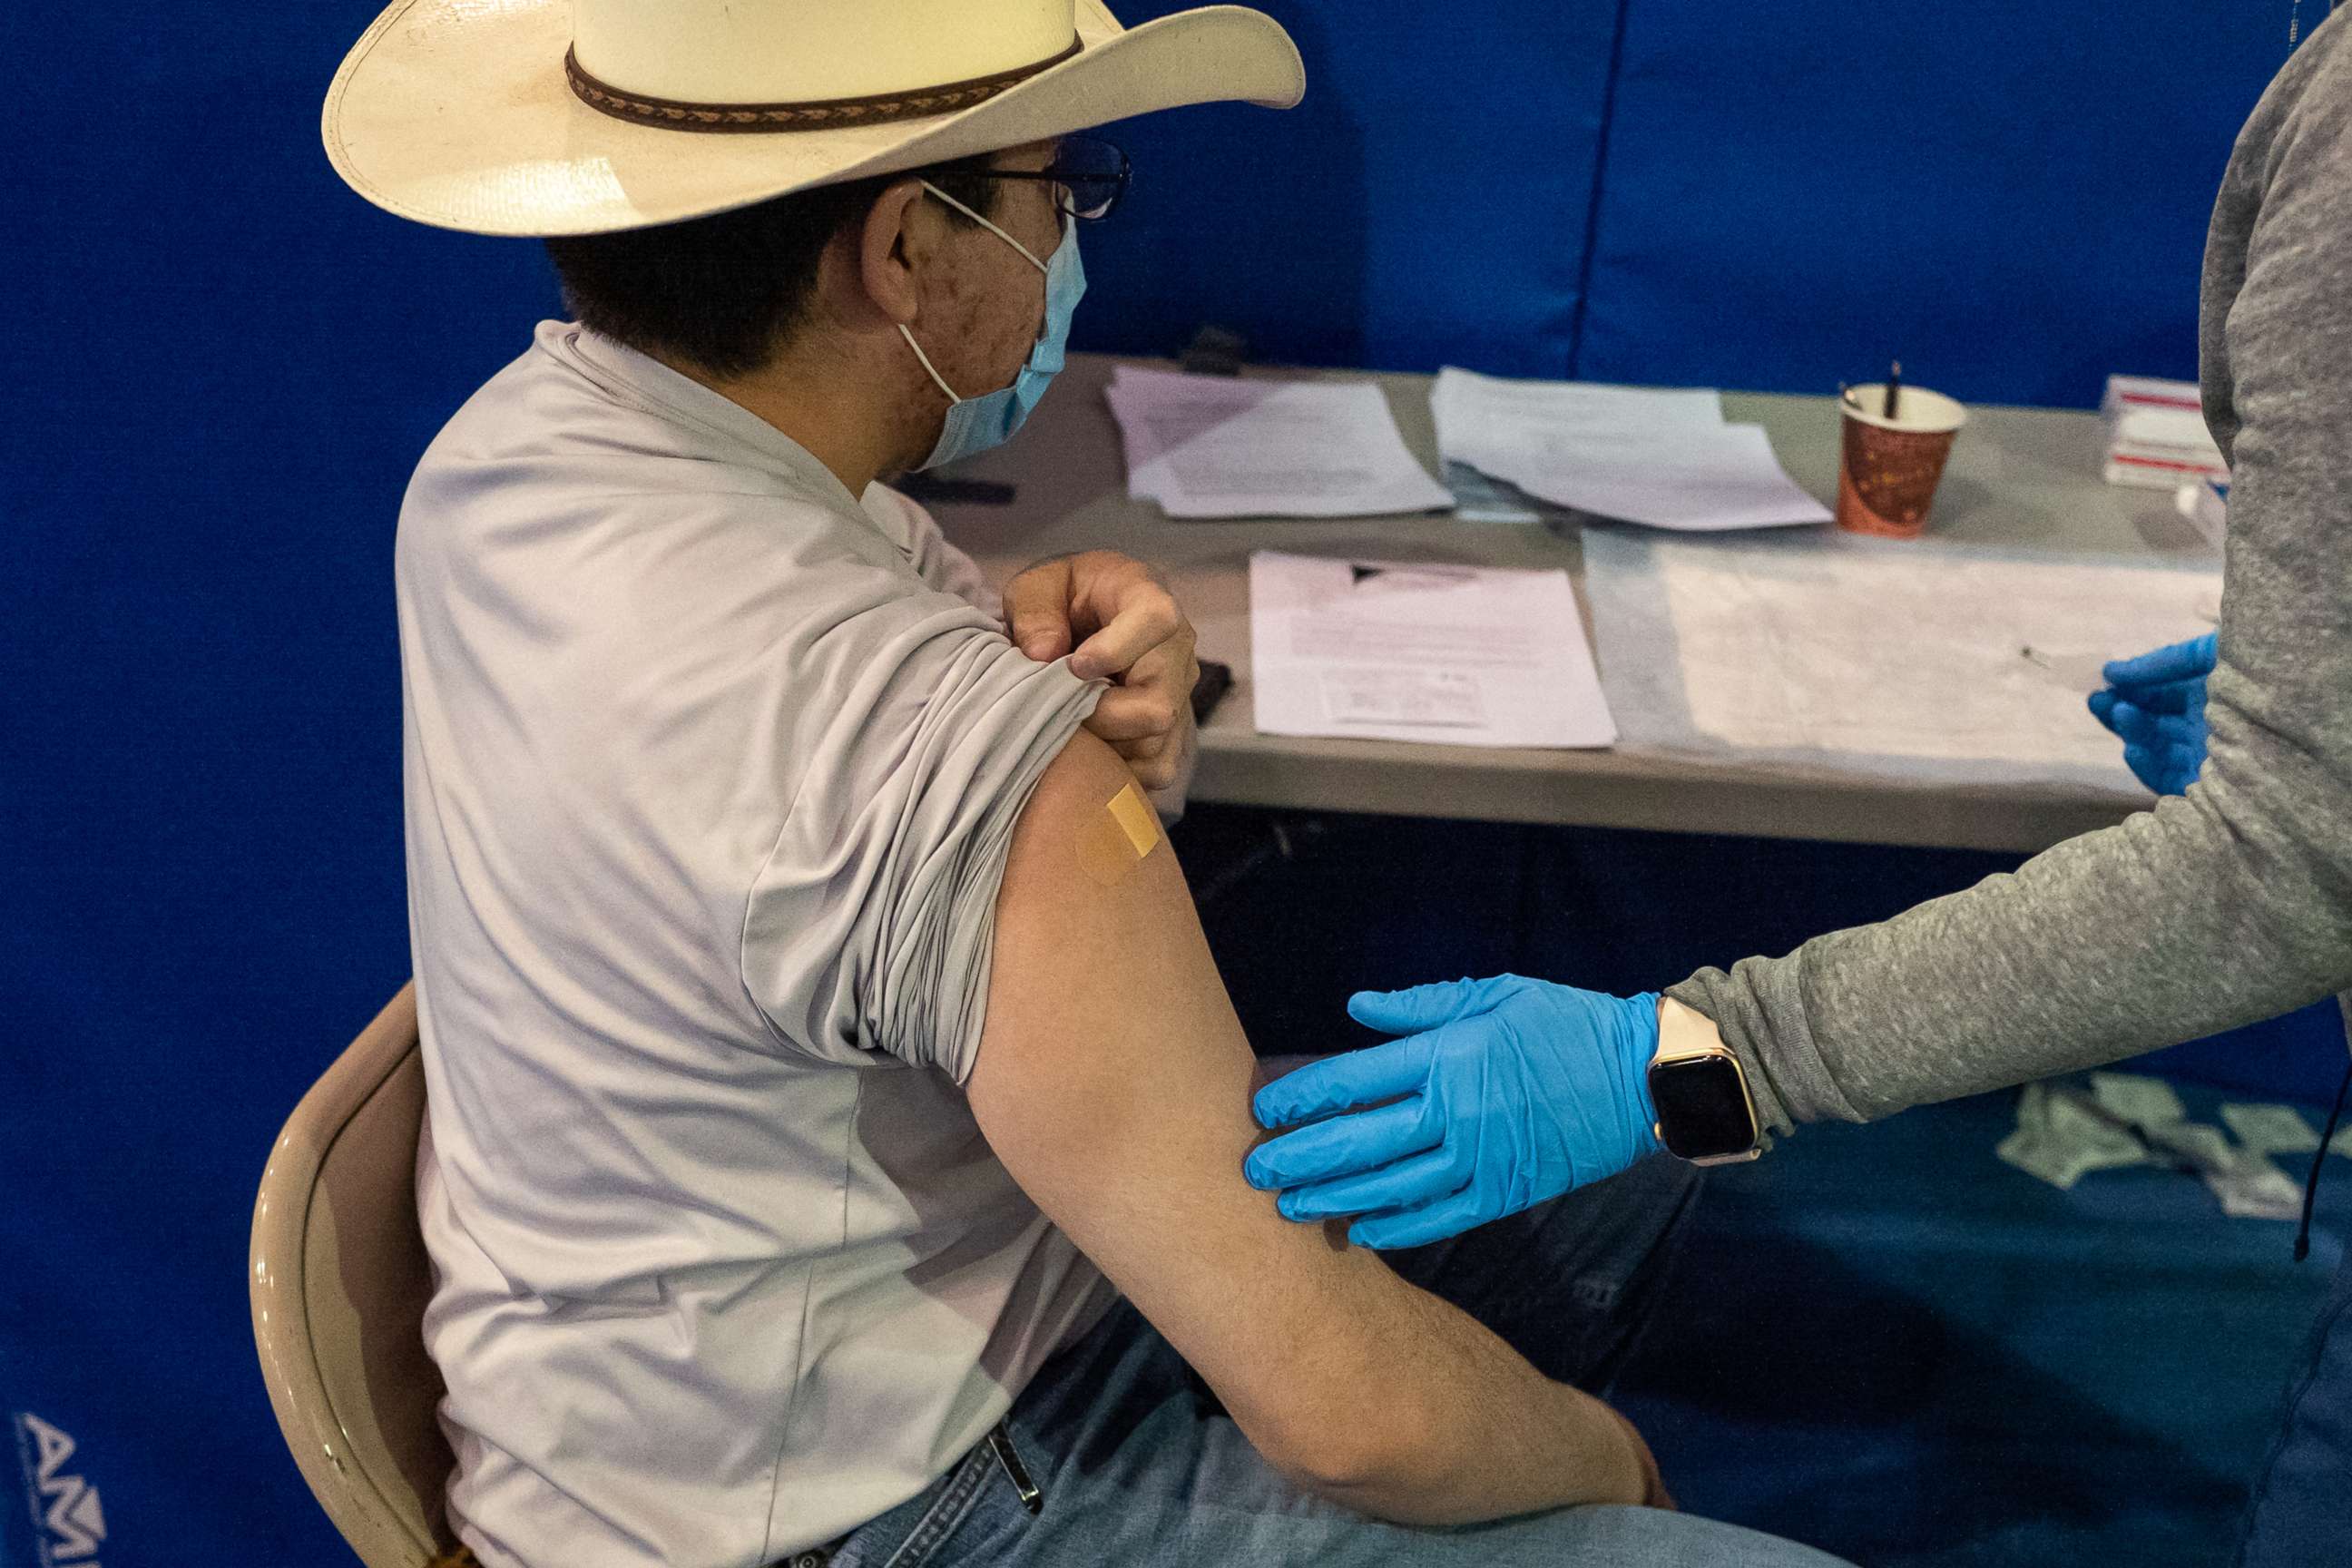 PHOTO: A healthcare worker speaks with a person that received a second dose of the Pfizer-BioNTech COVID-19 vaccine at the University of New Mexico's Gallup campus in Gallup, N.M., March 23, 2021.